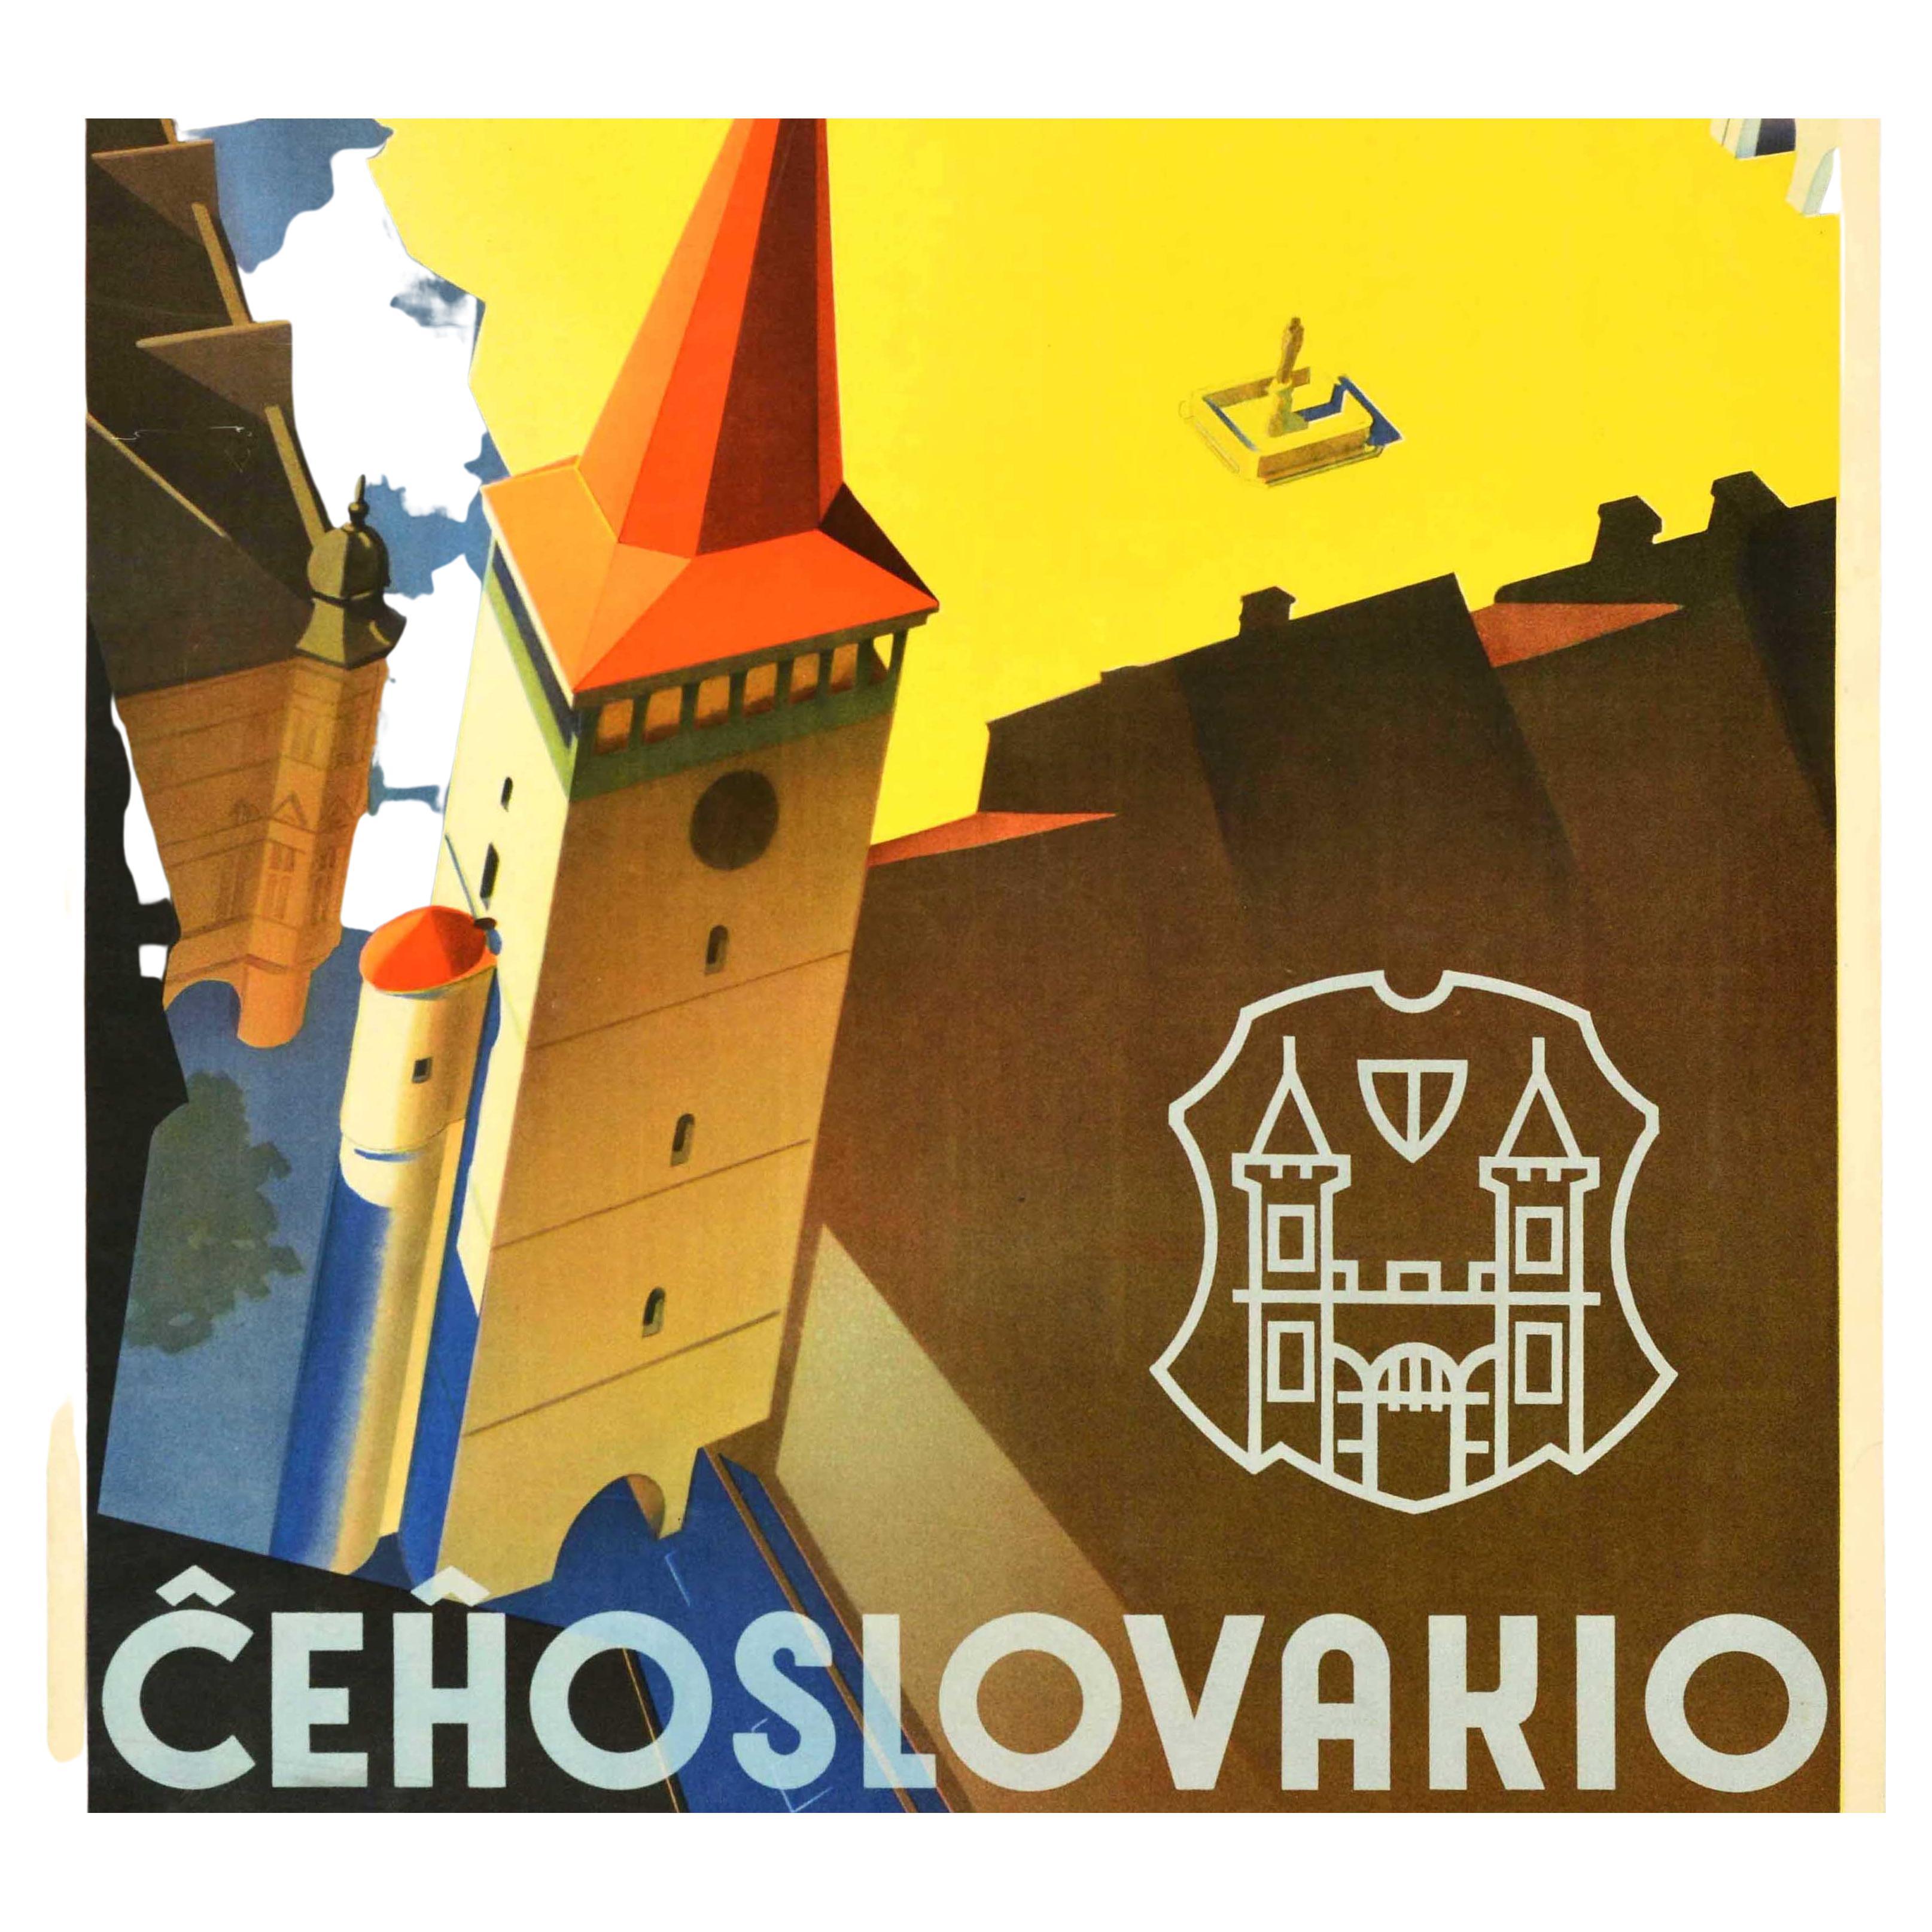 Original vintage travel poster advertising tourism to Czechoslovakia - Visit the town of Jicin and the Prachov Rocks / Prachovske Skaly - featuring a stunning aerial illustration of the historic Wallenstein Square / Valdstejnovo Namesti in yellow